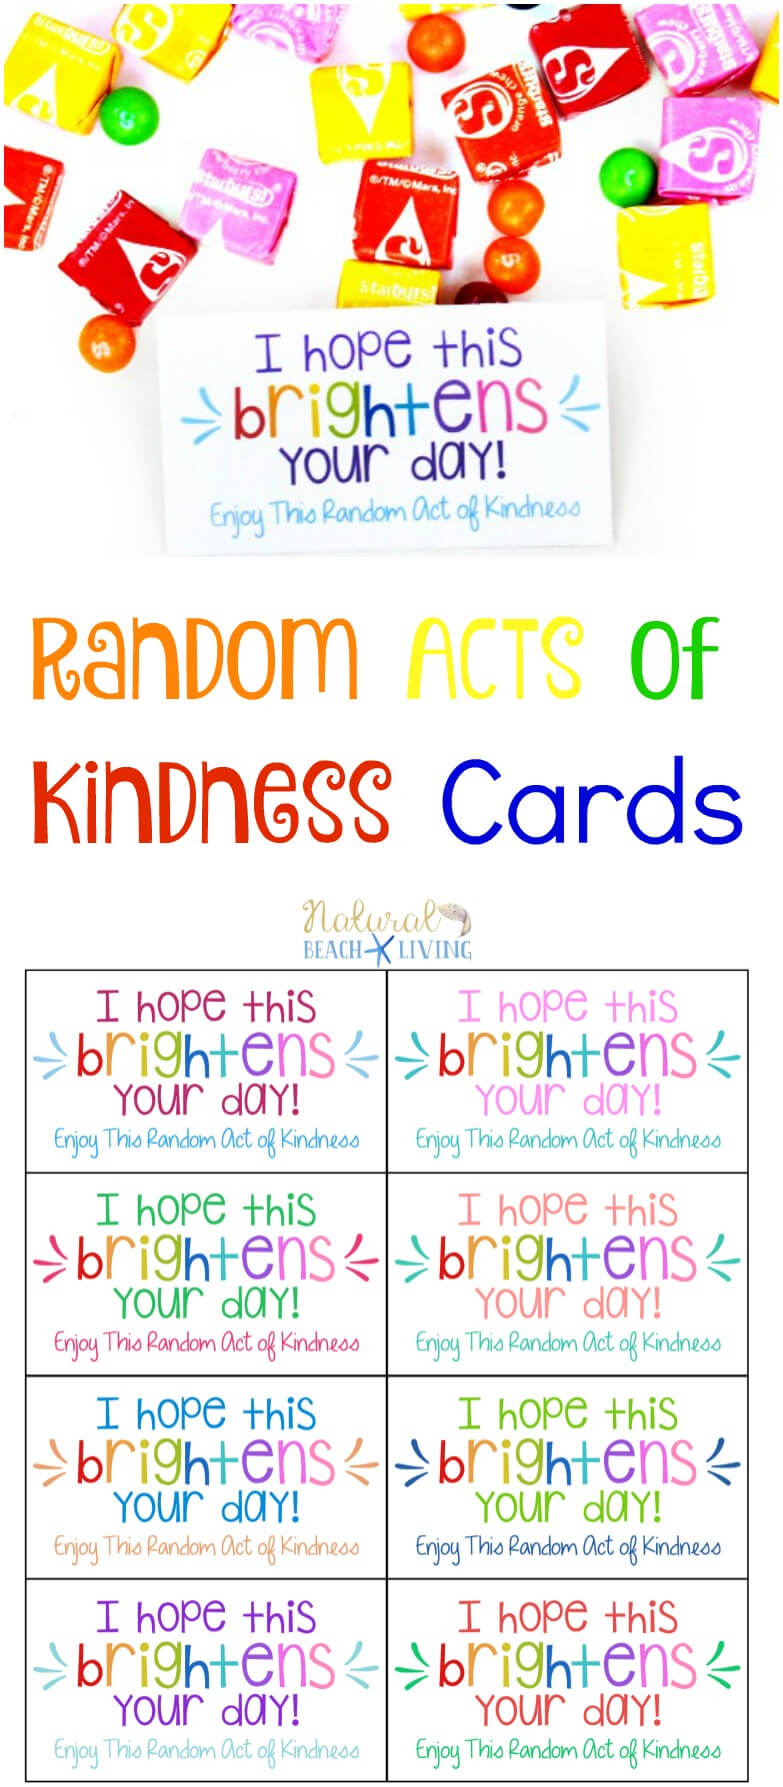 The Best Random Acts Of Kindness Printable Cards Free With Random Acts Of Kindness Cards Templates